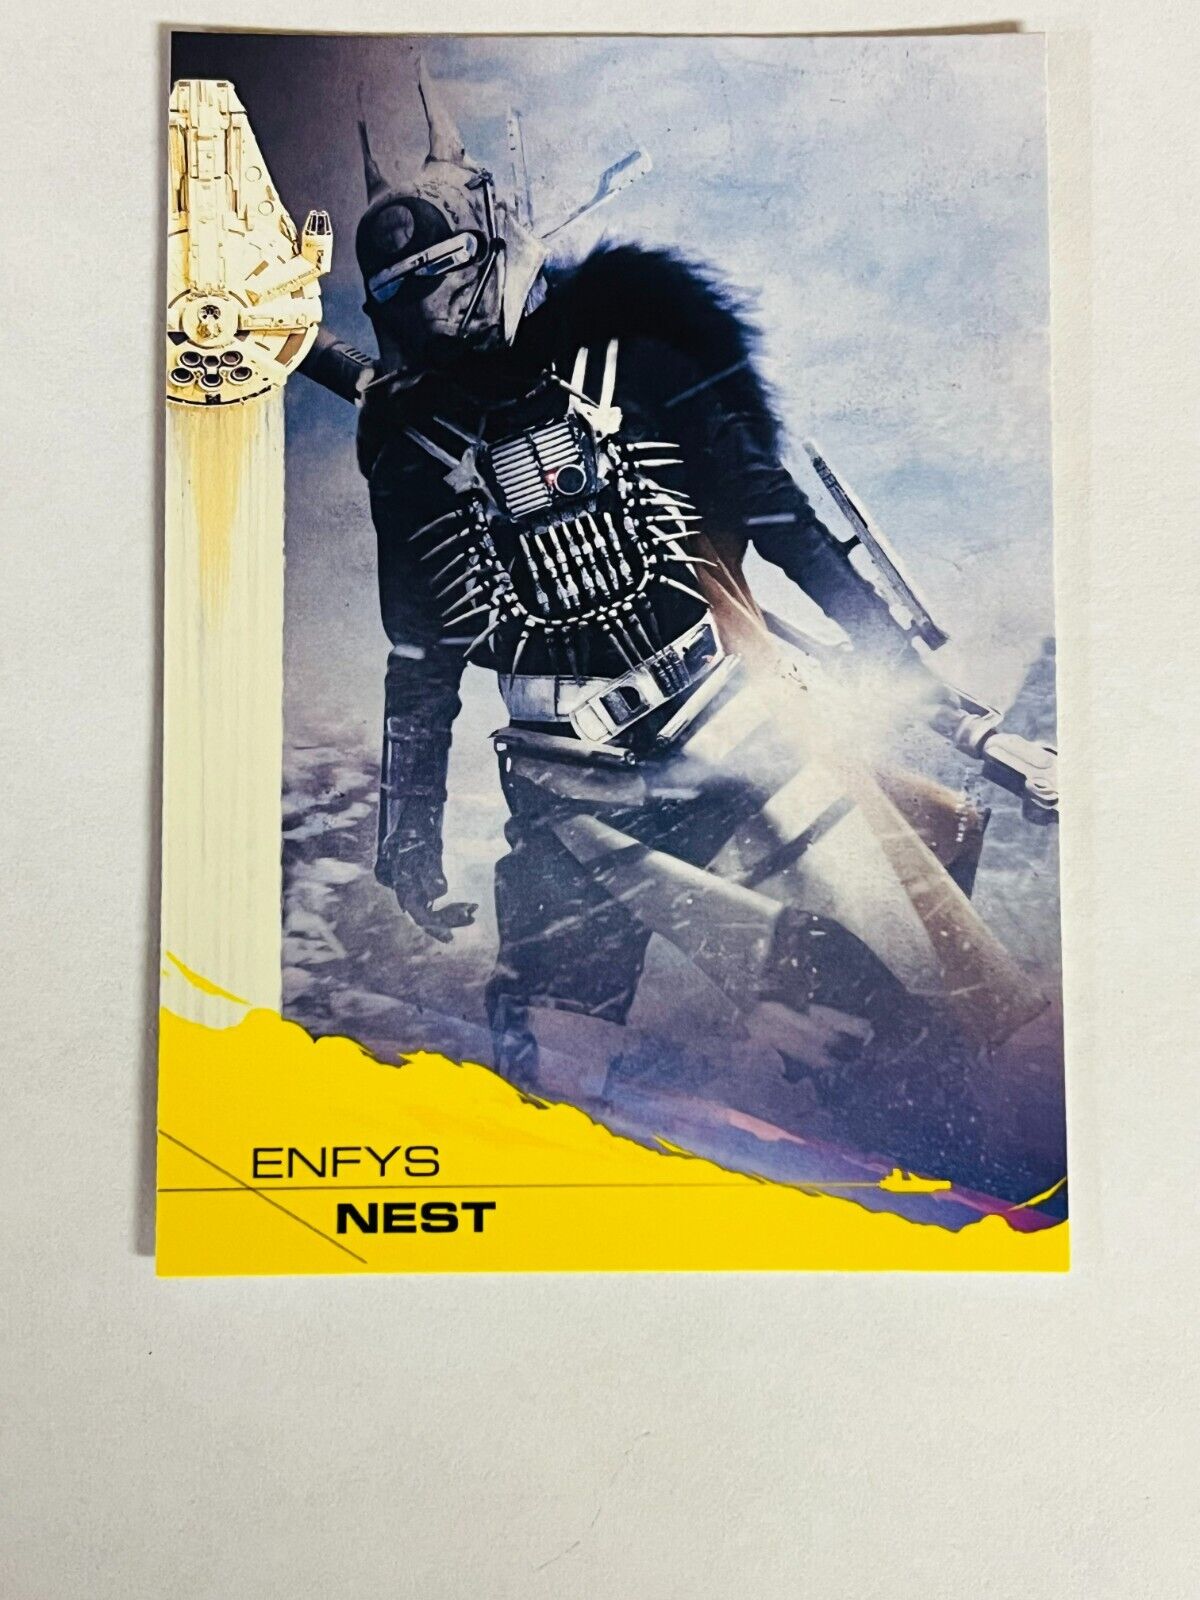 2018 Topps Solo A Star Wars Story Base Card #8 Enfys Nest